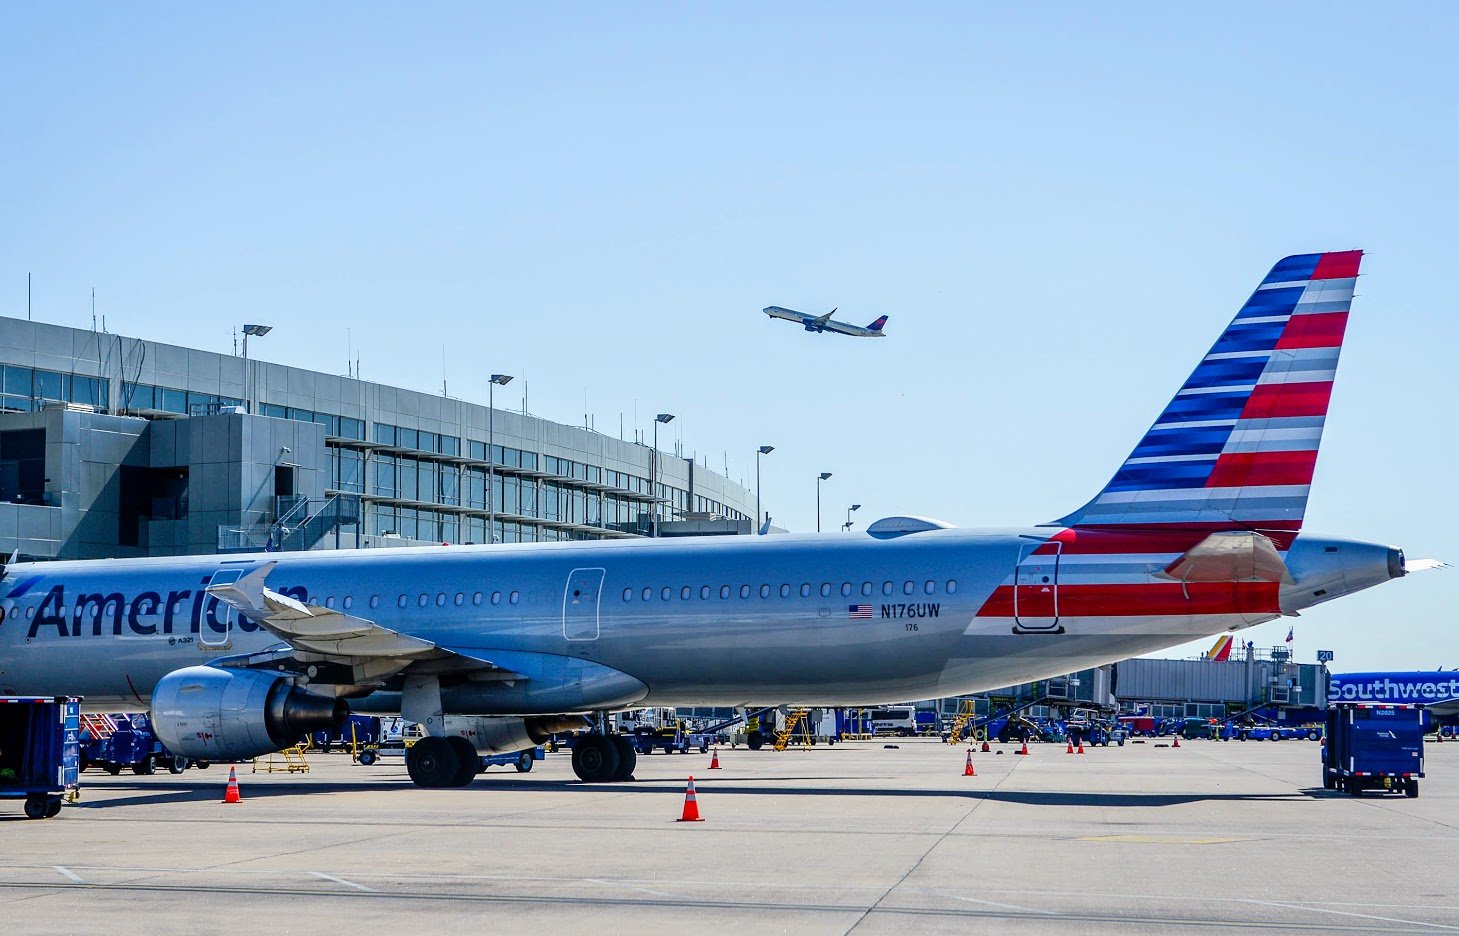 An American Airlines plane waits at the terminal gate. The plane is silver with an American flag painted on the tail. Another plane is in the sky above, having just taken off from the airfield.